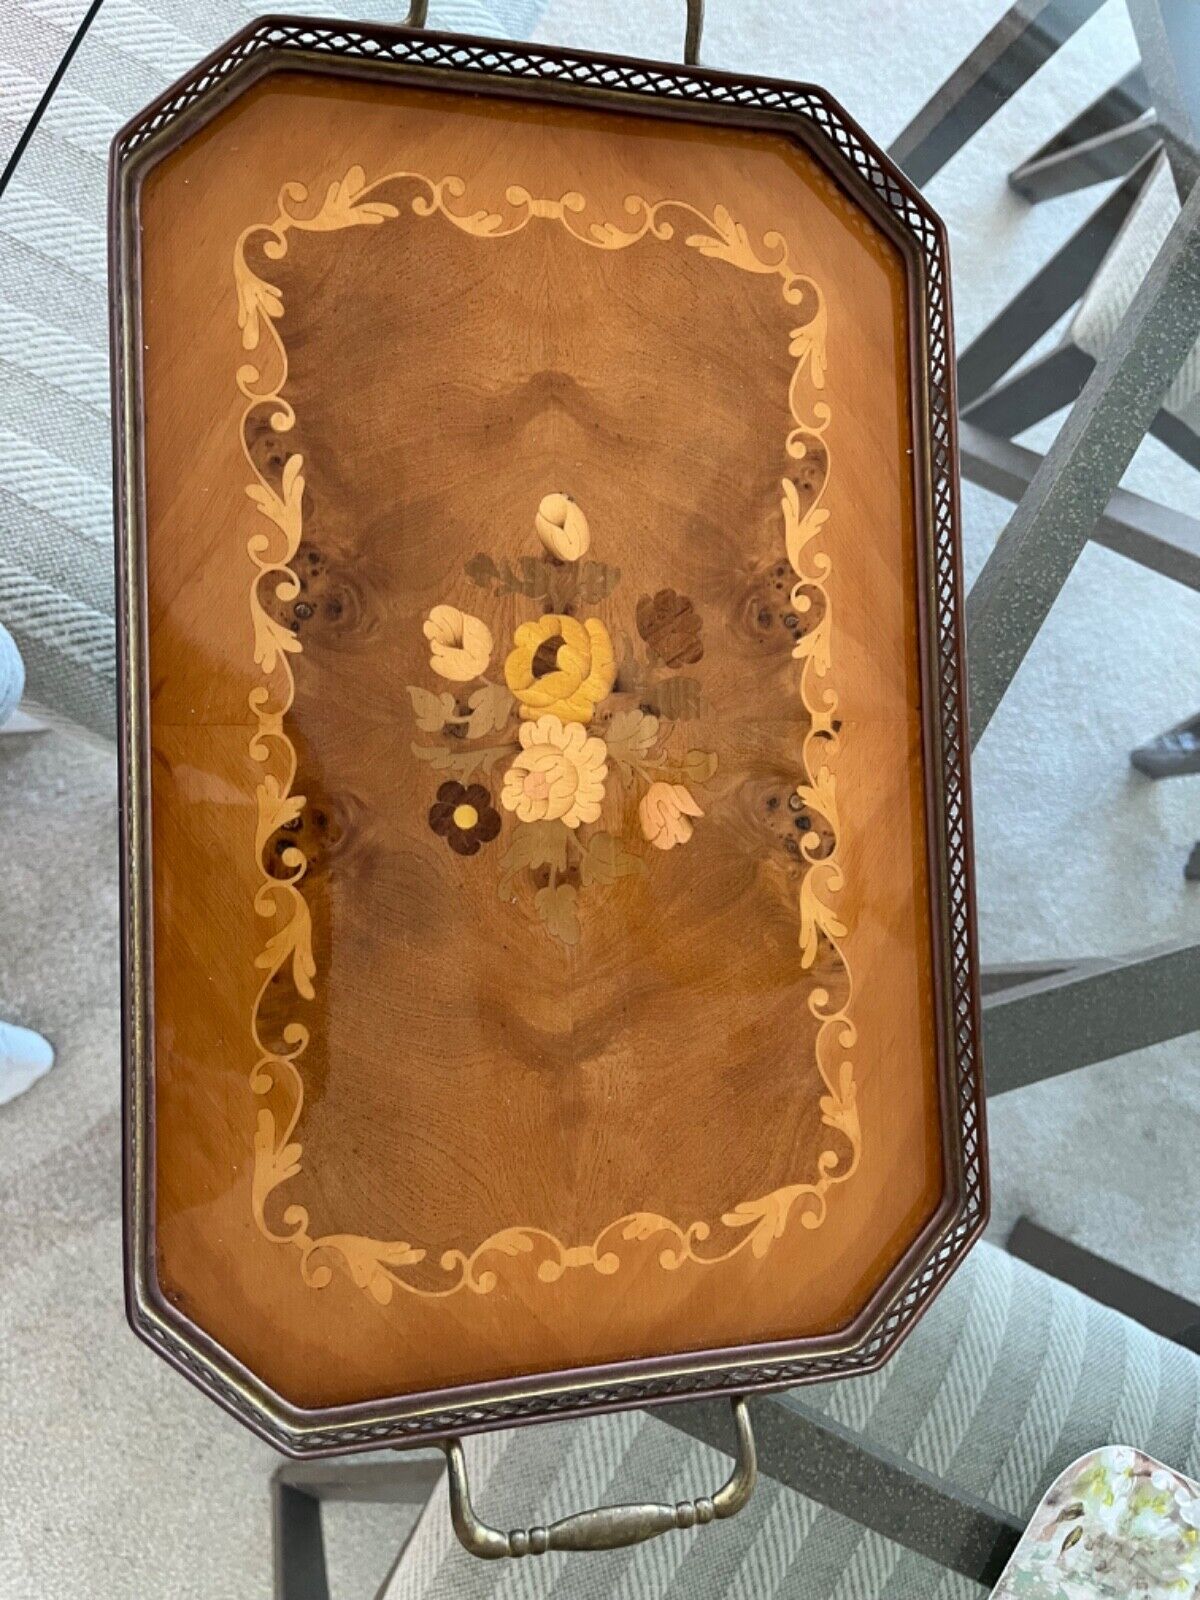 Vintage Italian inlaid wood floral serving tray with brass trim and handles